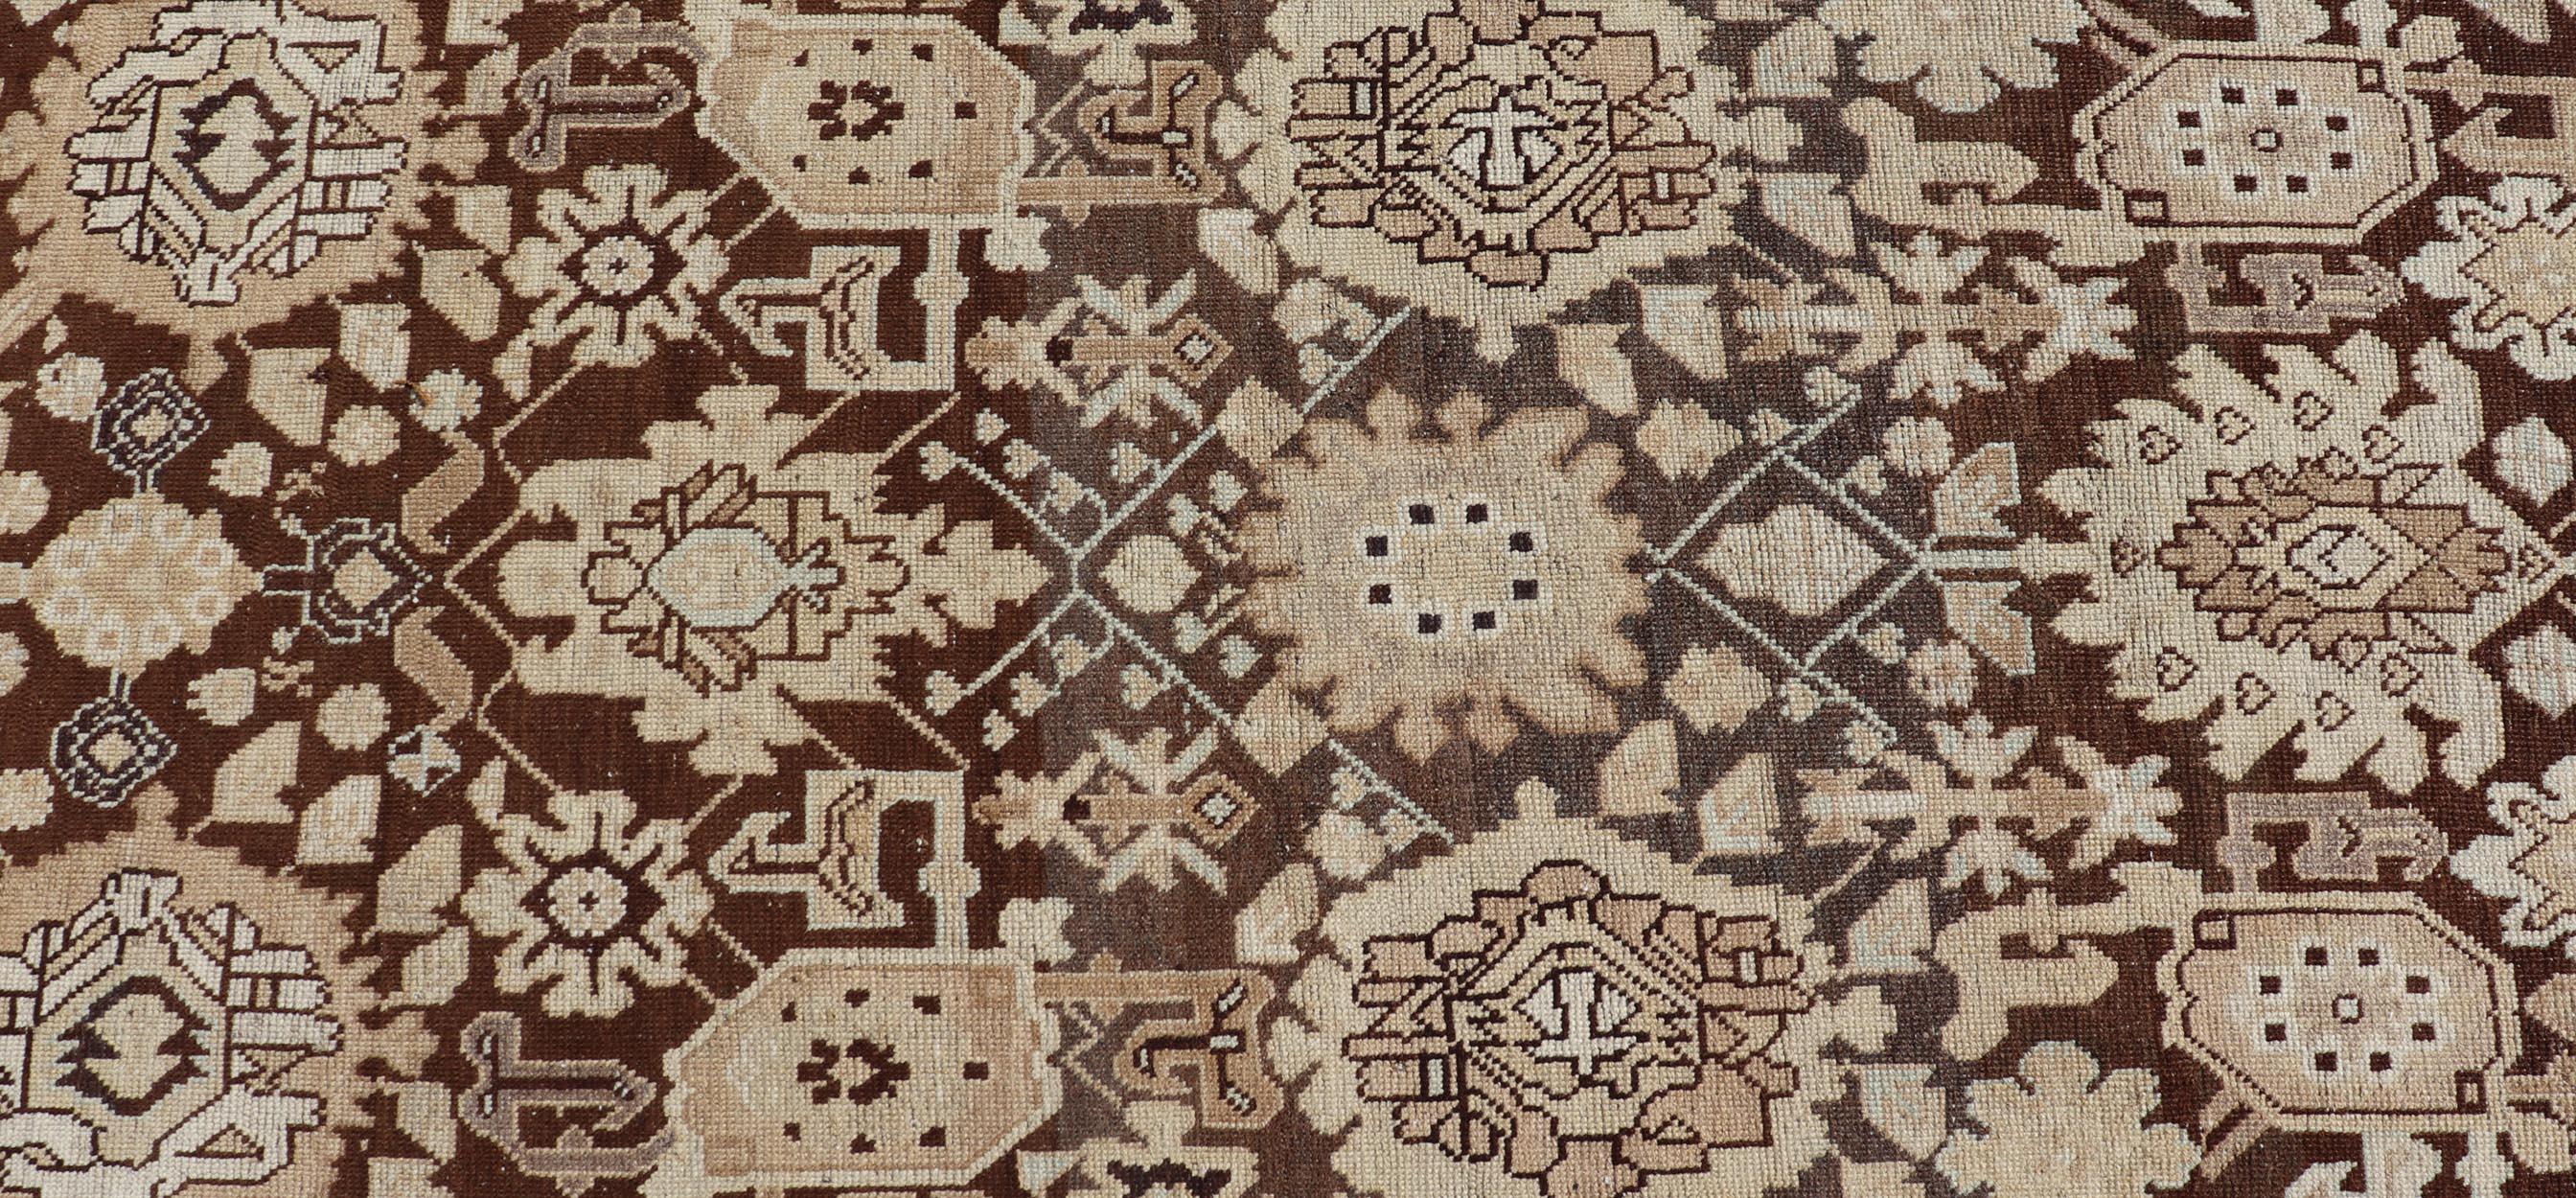 Wool Antique Karabagh Runner with All-Over Floral Medallion Design in Brown and Tan For Sale